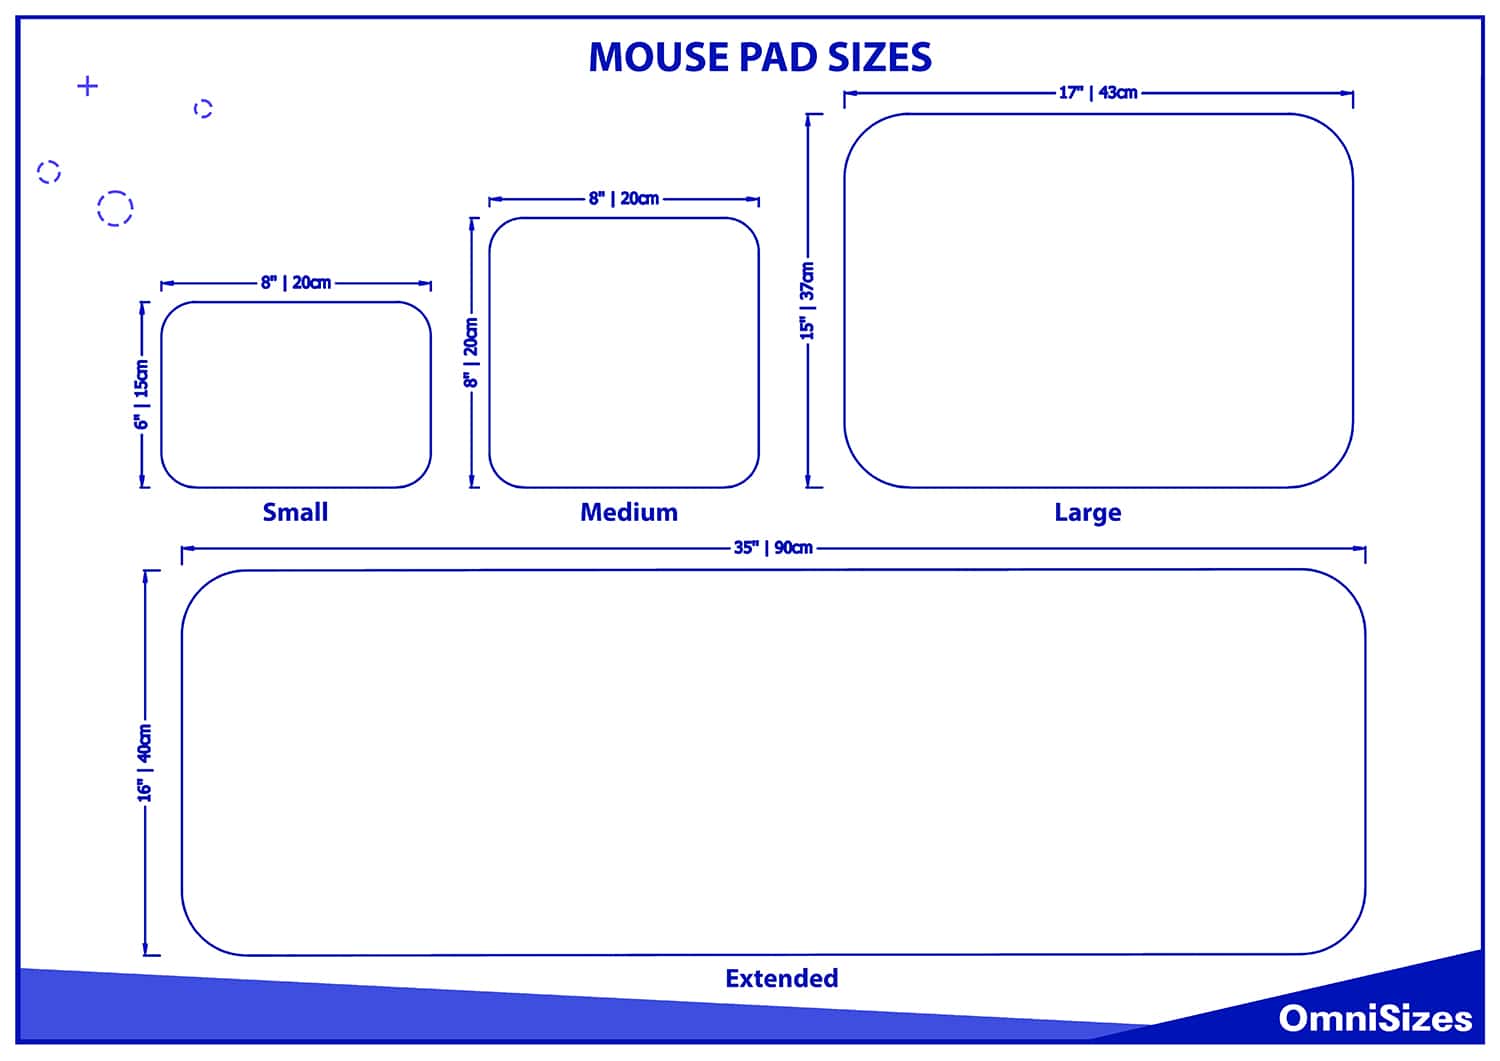 Mouse pad sizes